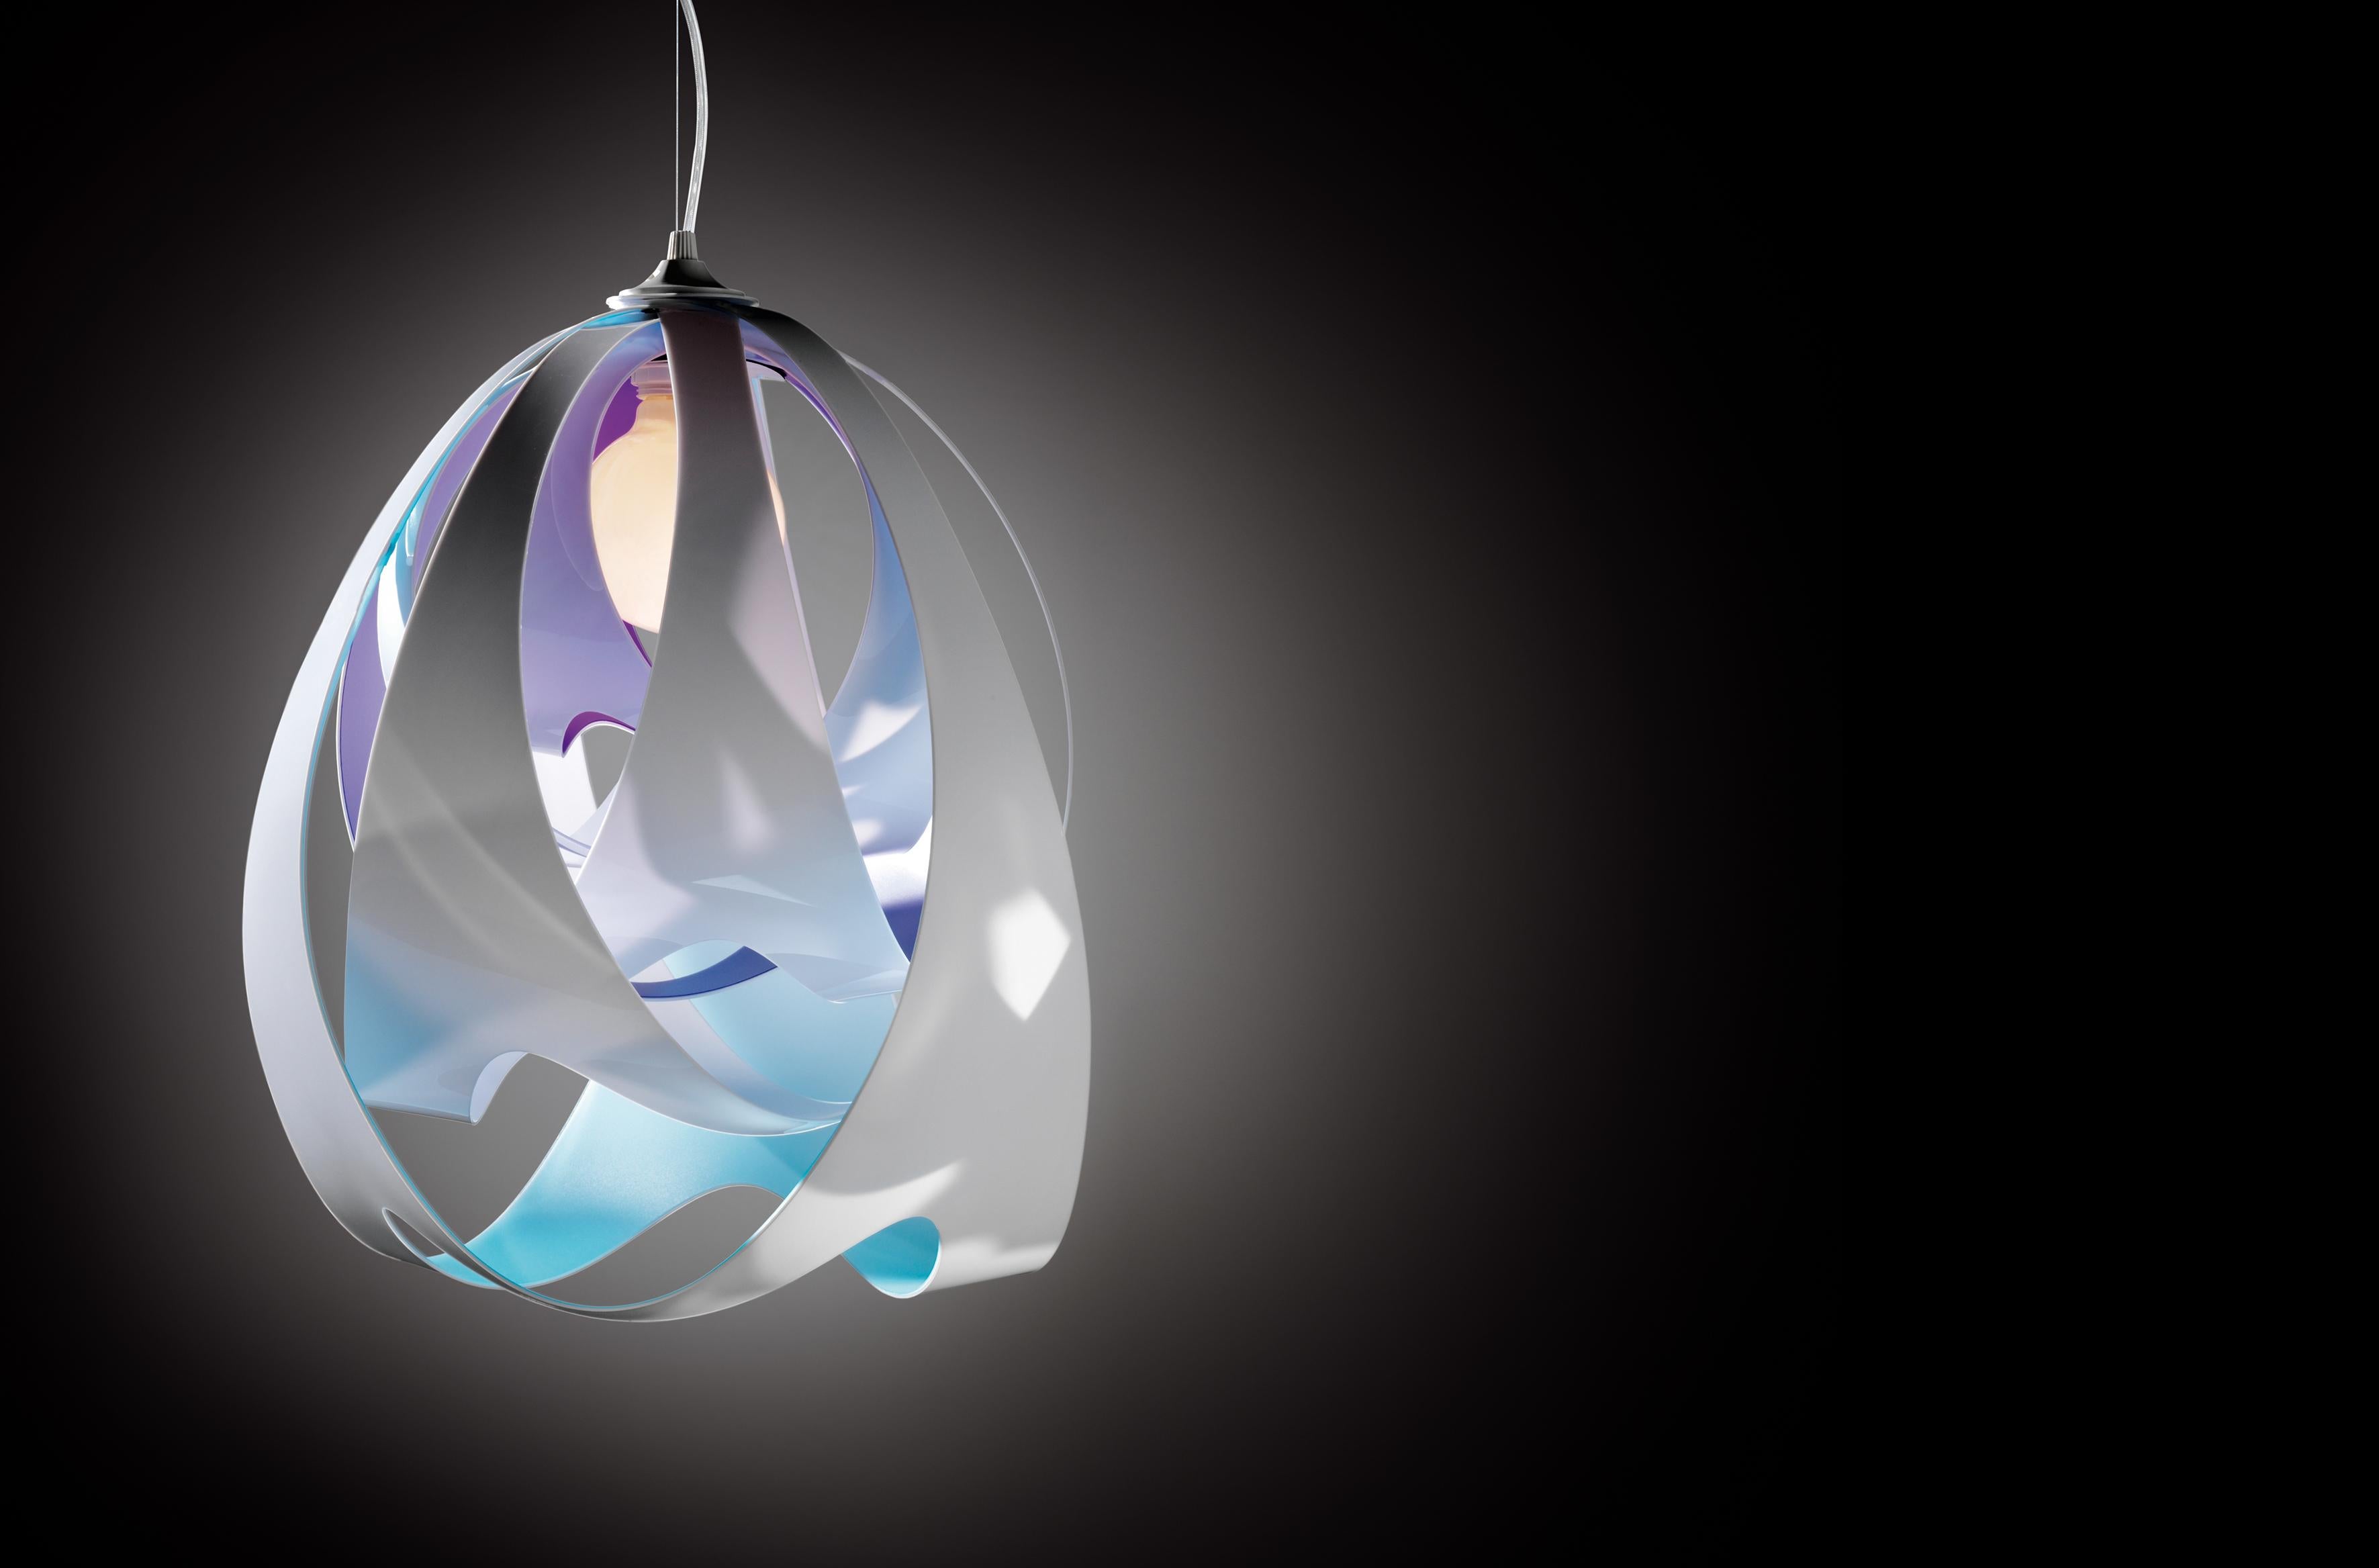 The weightless, fluid form of liquid has been captured in this luminous body, and Goccia’s unique design plays hide and seek with the central light source. Both the Prisma Lentiflex® and colored versions have extraordinary, varying effects and